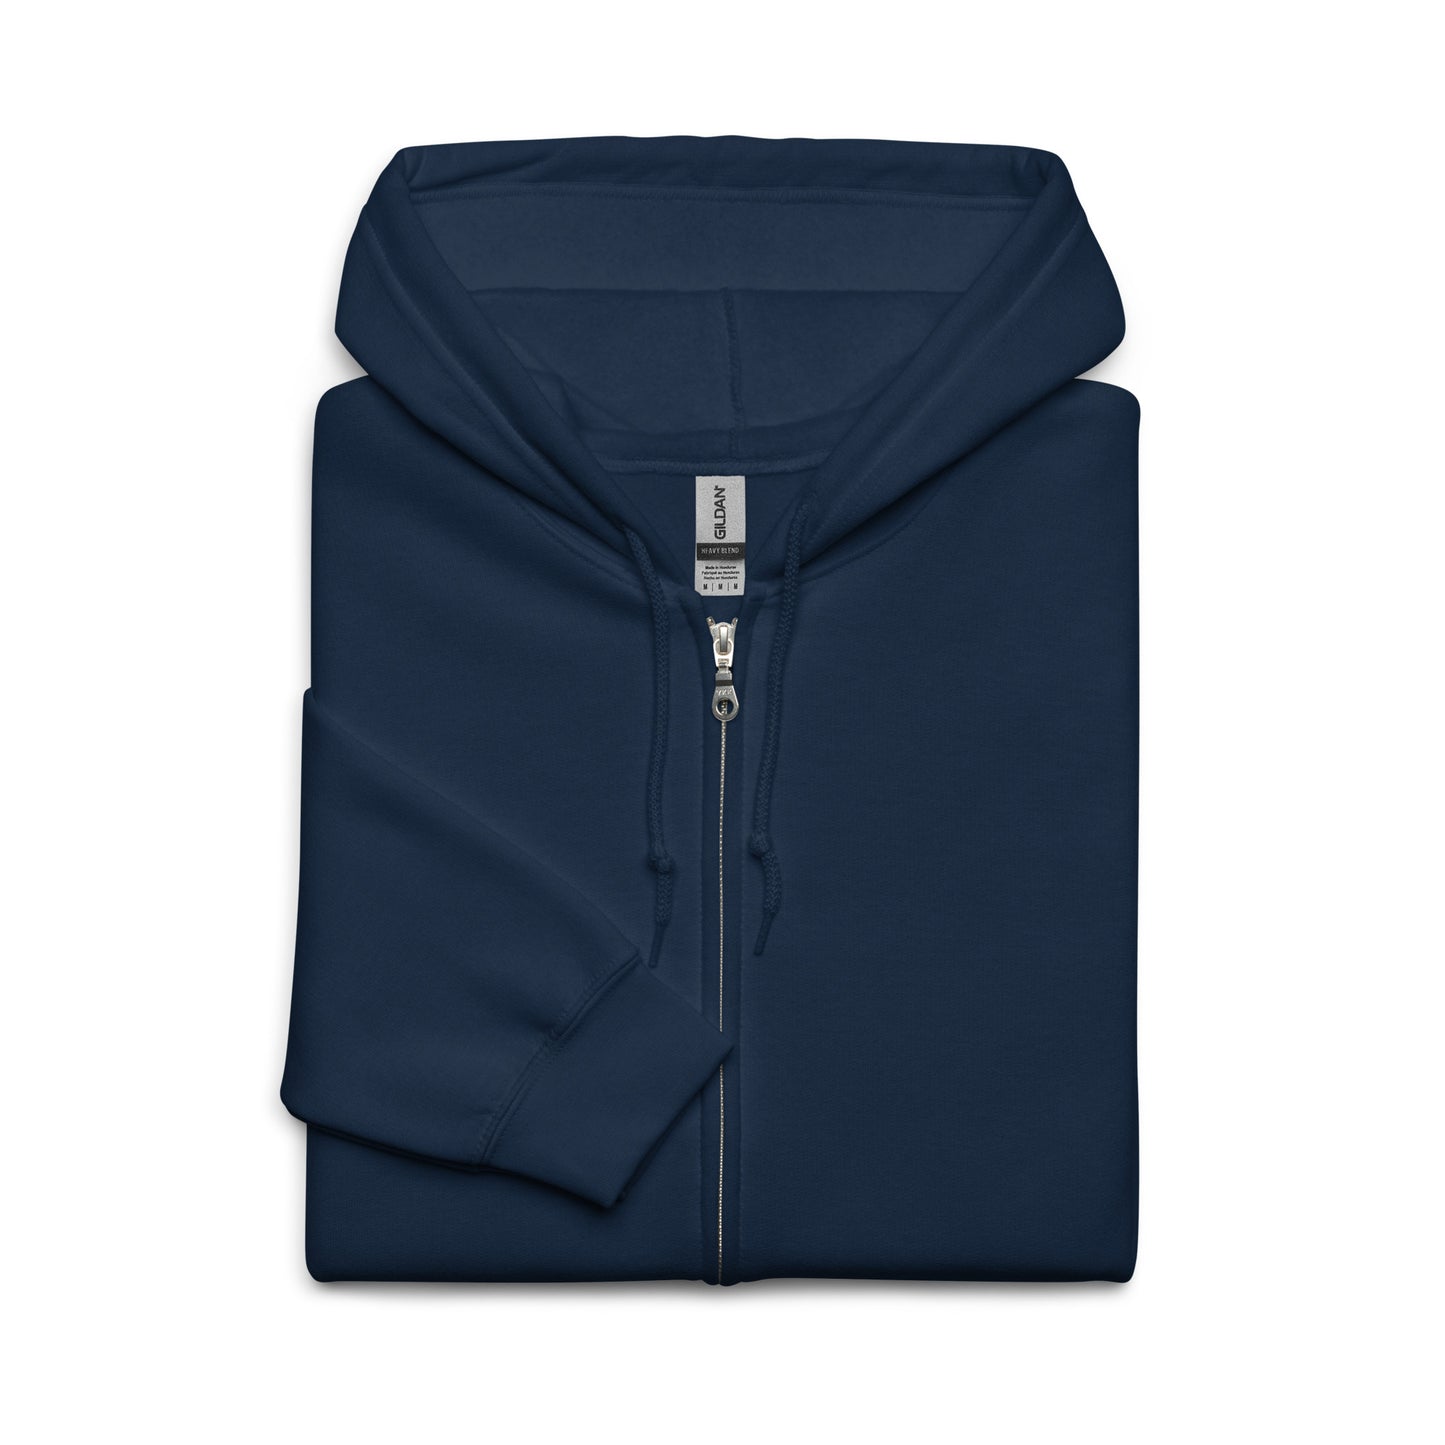 Limerence Heavy Harmony Fusion Zip Hoodie - Navy